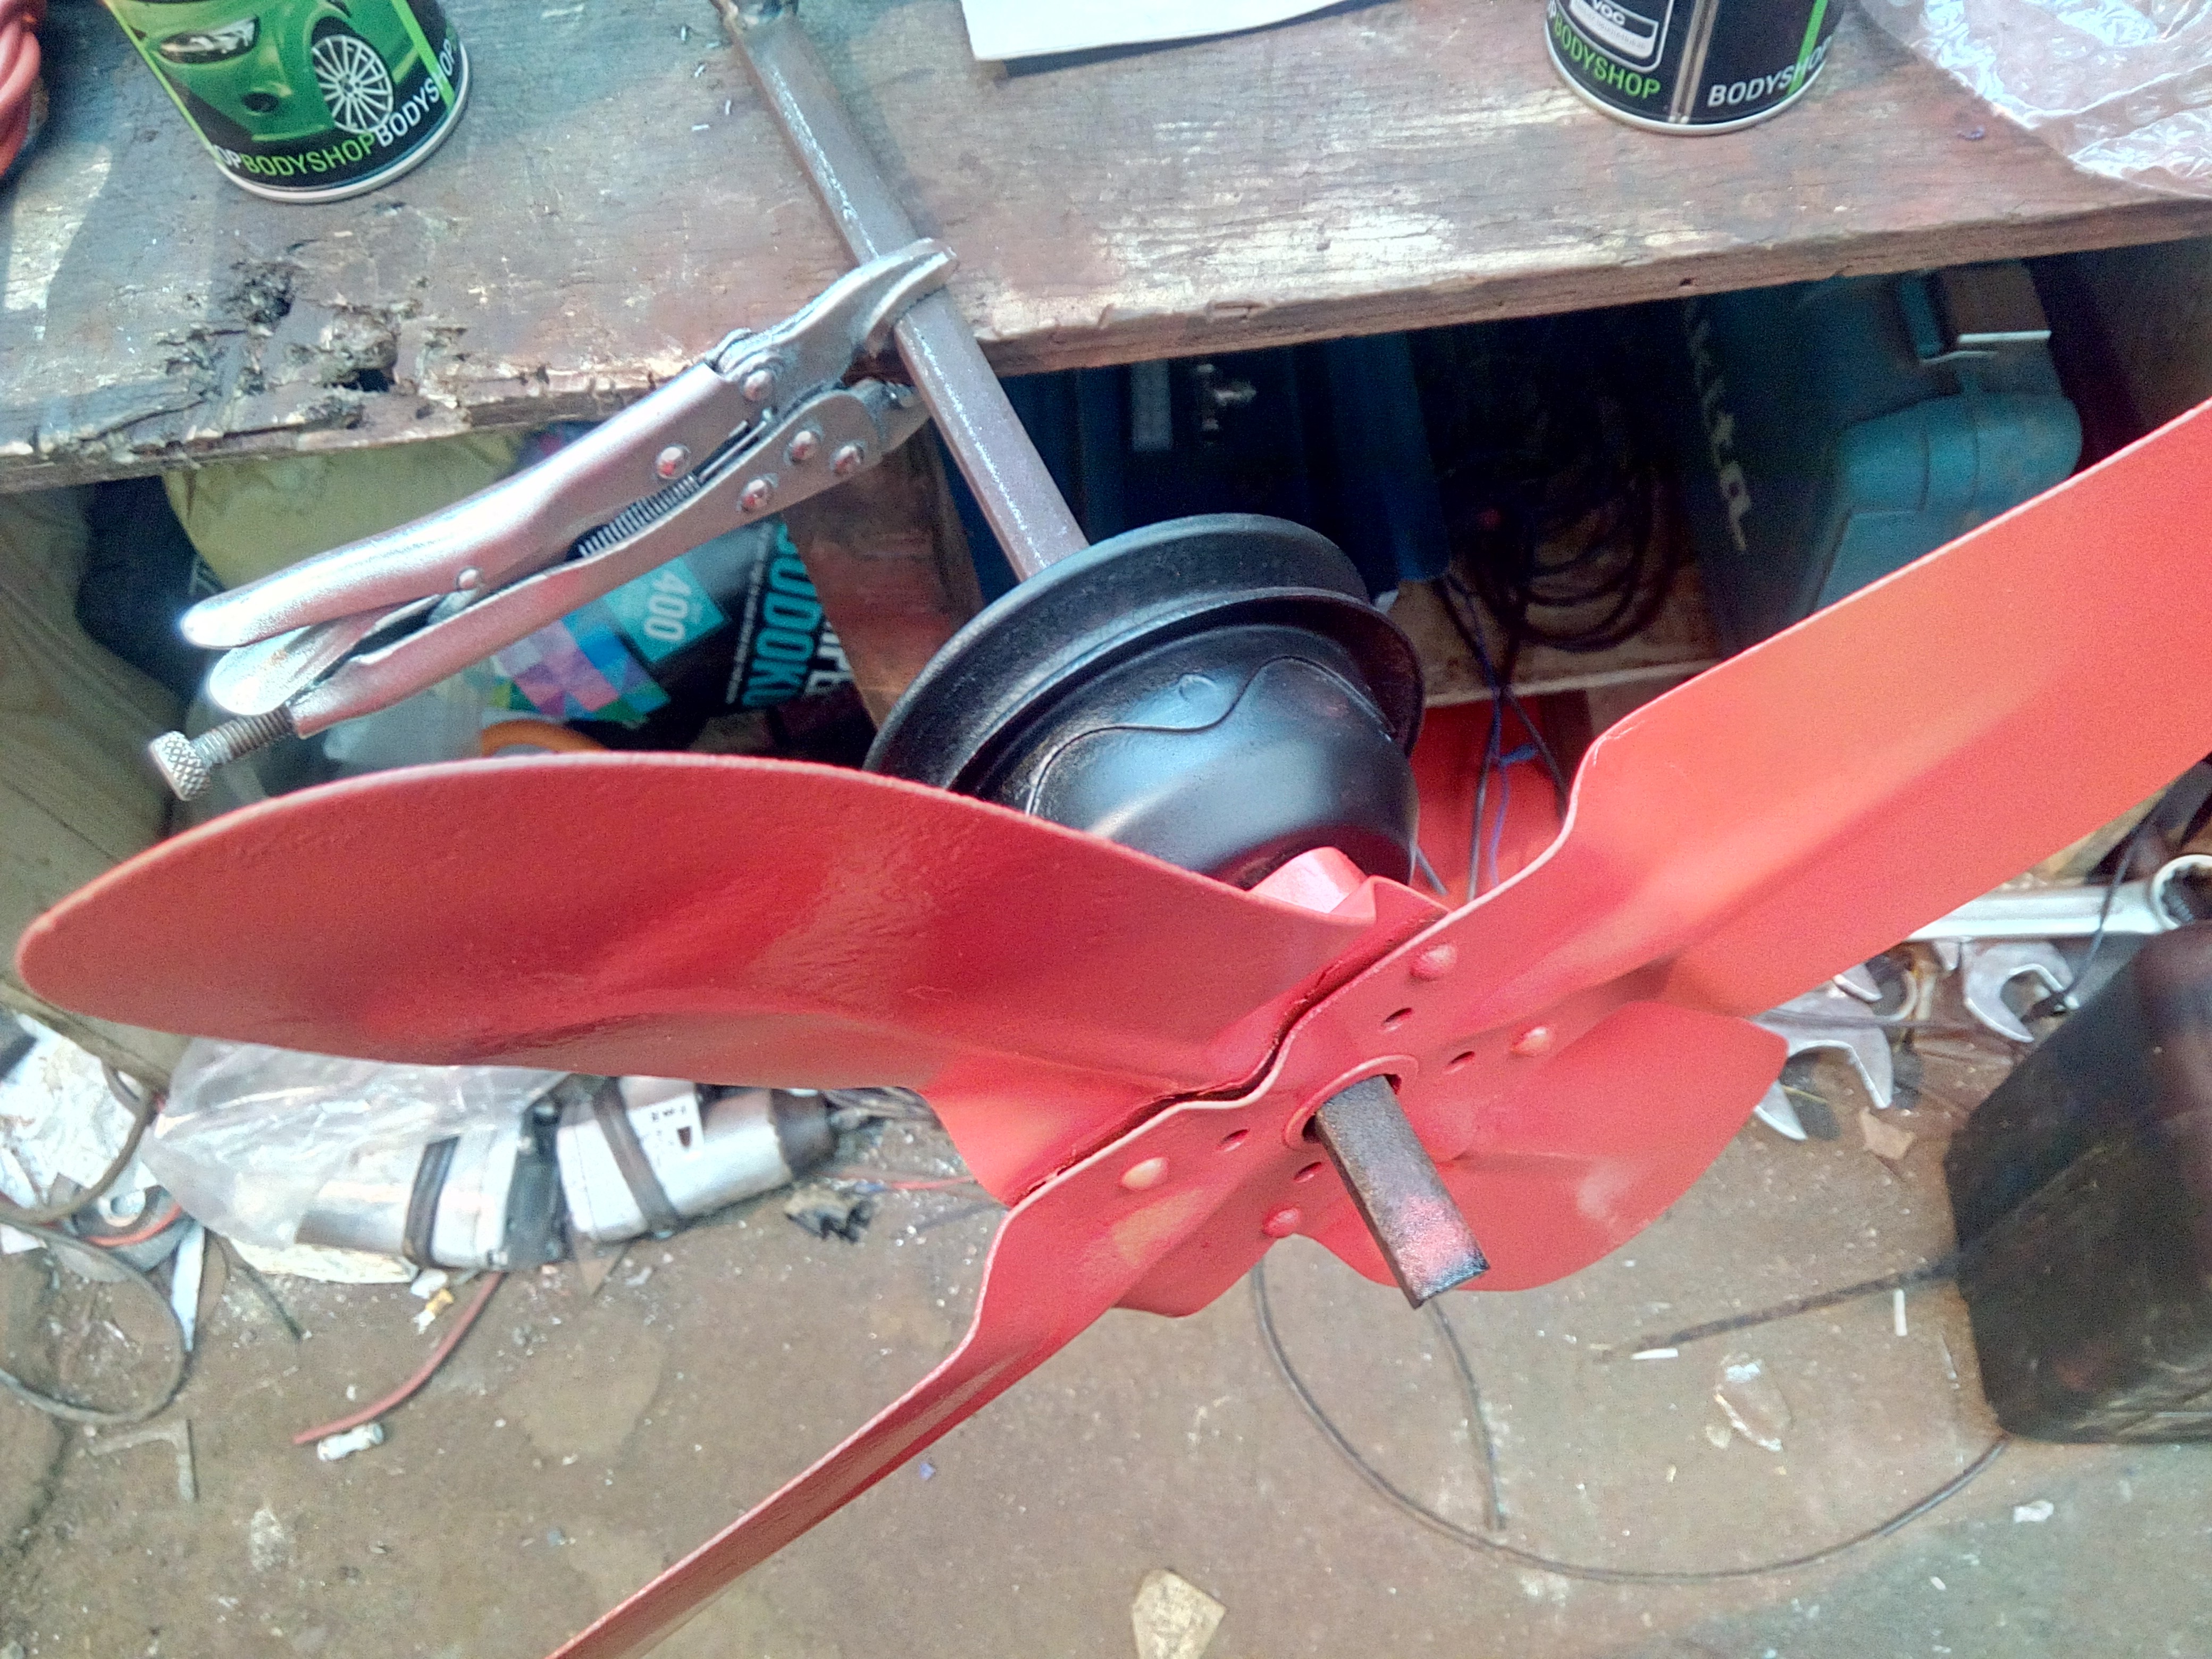 Photograph of the cooling fan and water pump pulley hanging off a
piece of metal rod clipped to the workbench. The fan is painted bright
red, and the pulley has been painted matte black.